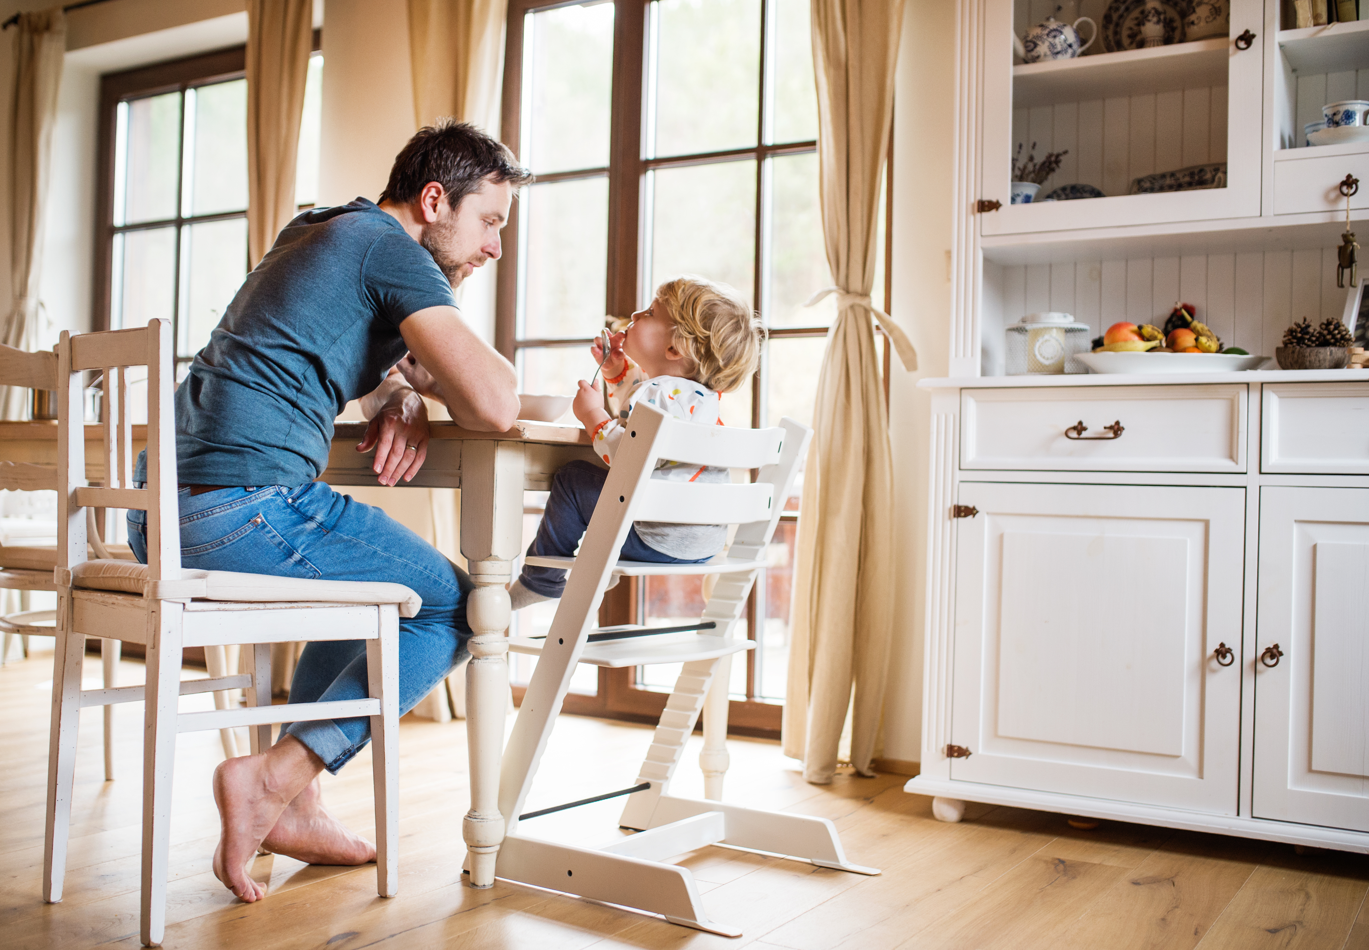 A father and toddler sit at the dining table. Toddler is in a high chair having a meal. Warm, sunny room next to the kitchen. Concept of toddler routines, single parenting, mealtime, toddler tips.